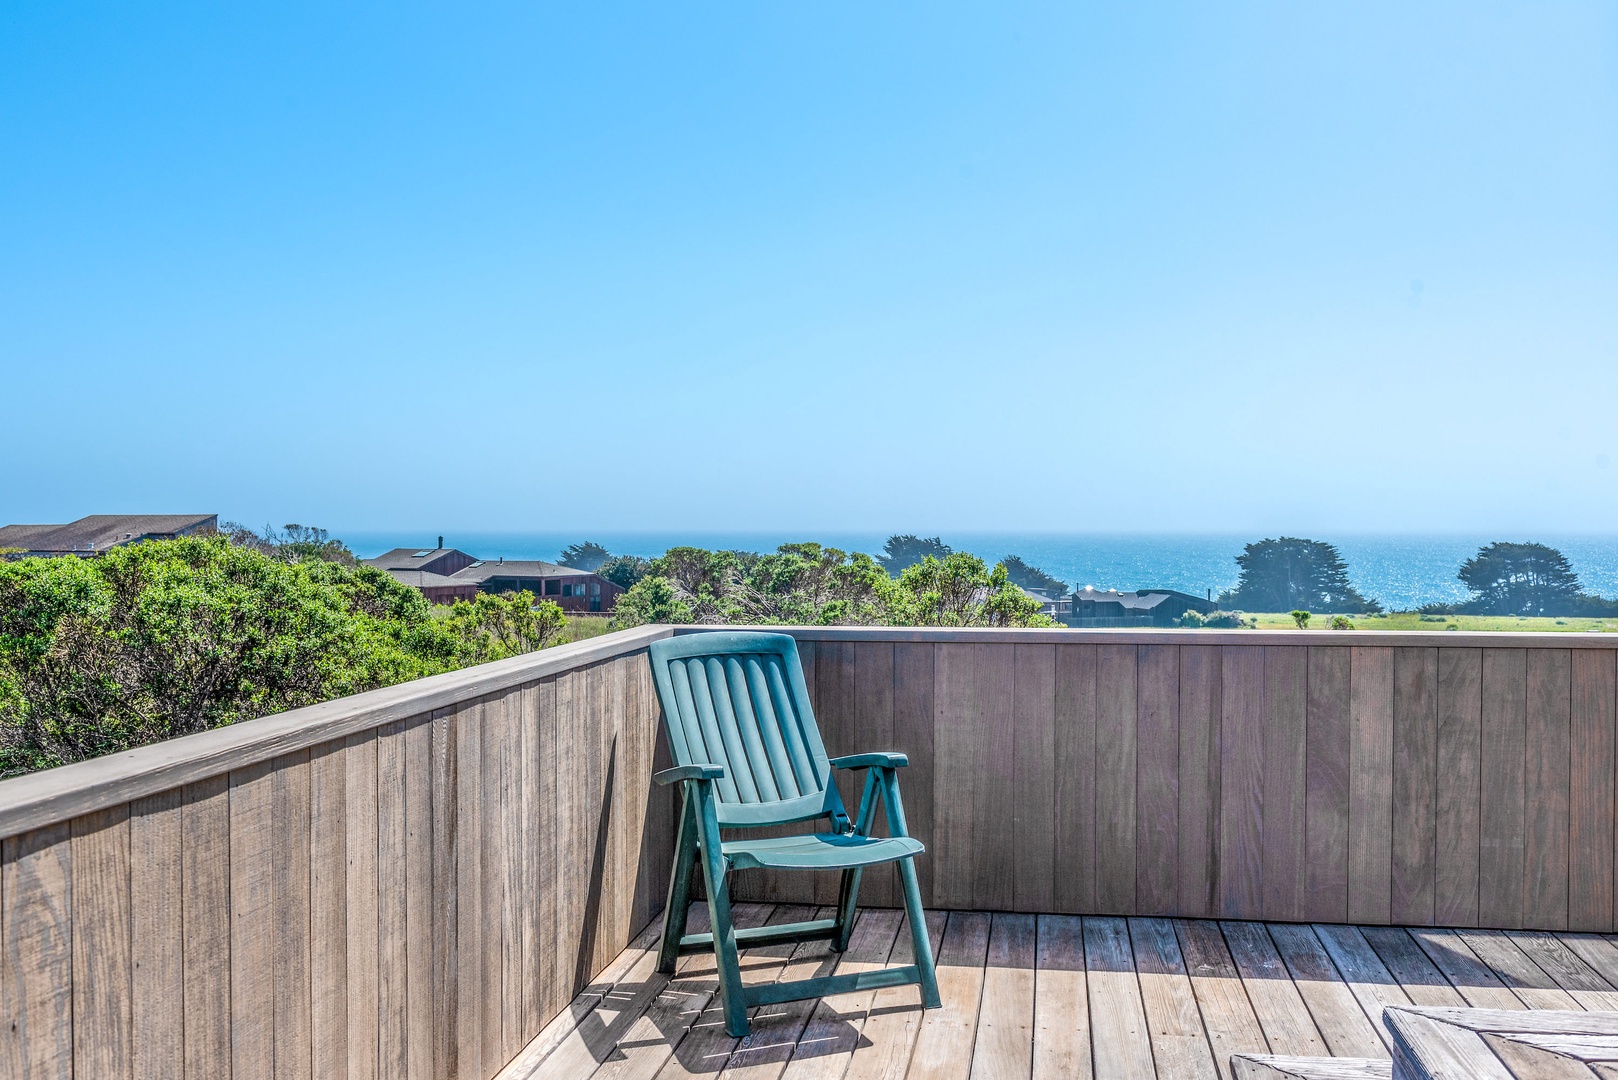 Sit out here with your morning coffee and enjoy the ocean view!